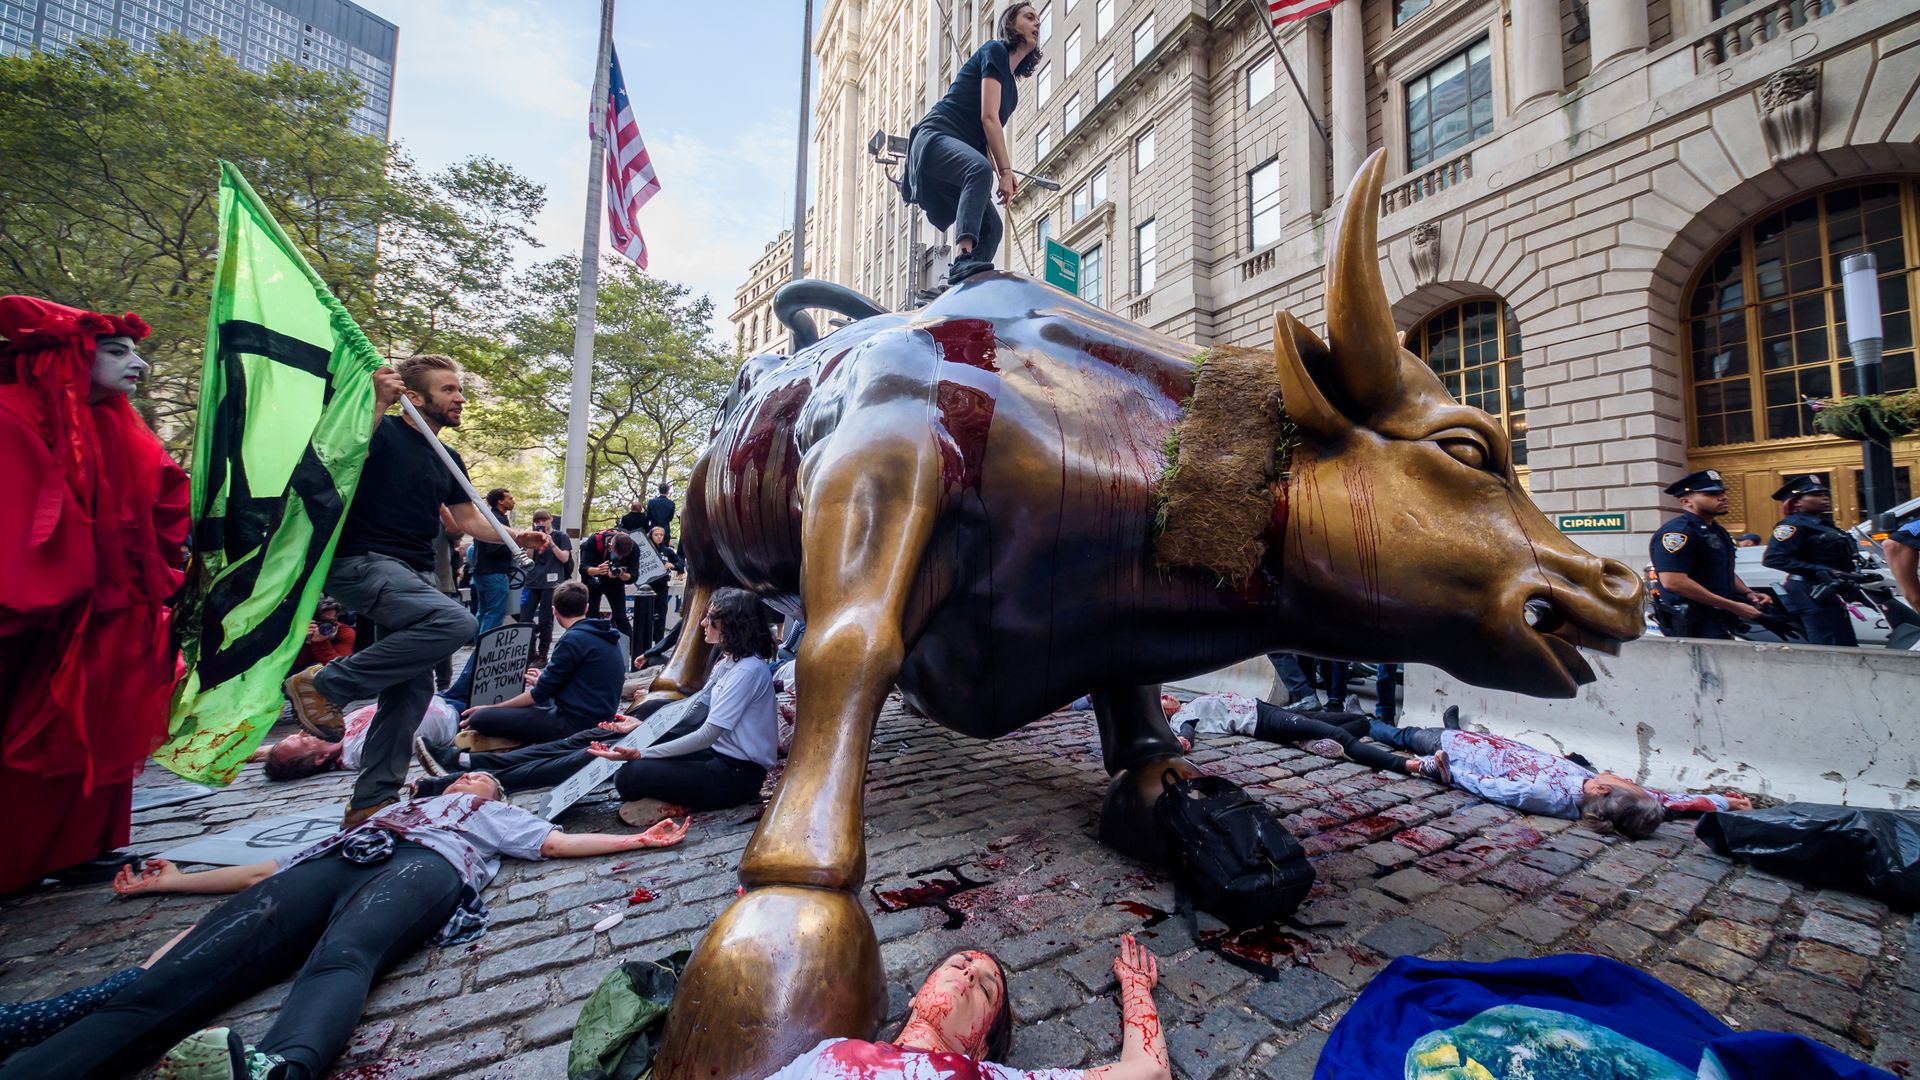 Climate advocacy group Extinction Rebellion stages protest on Wall Street standing on the bull statue and posing people with fake blood on the ground